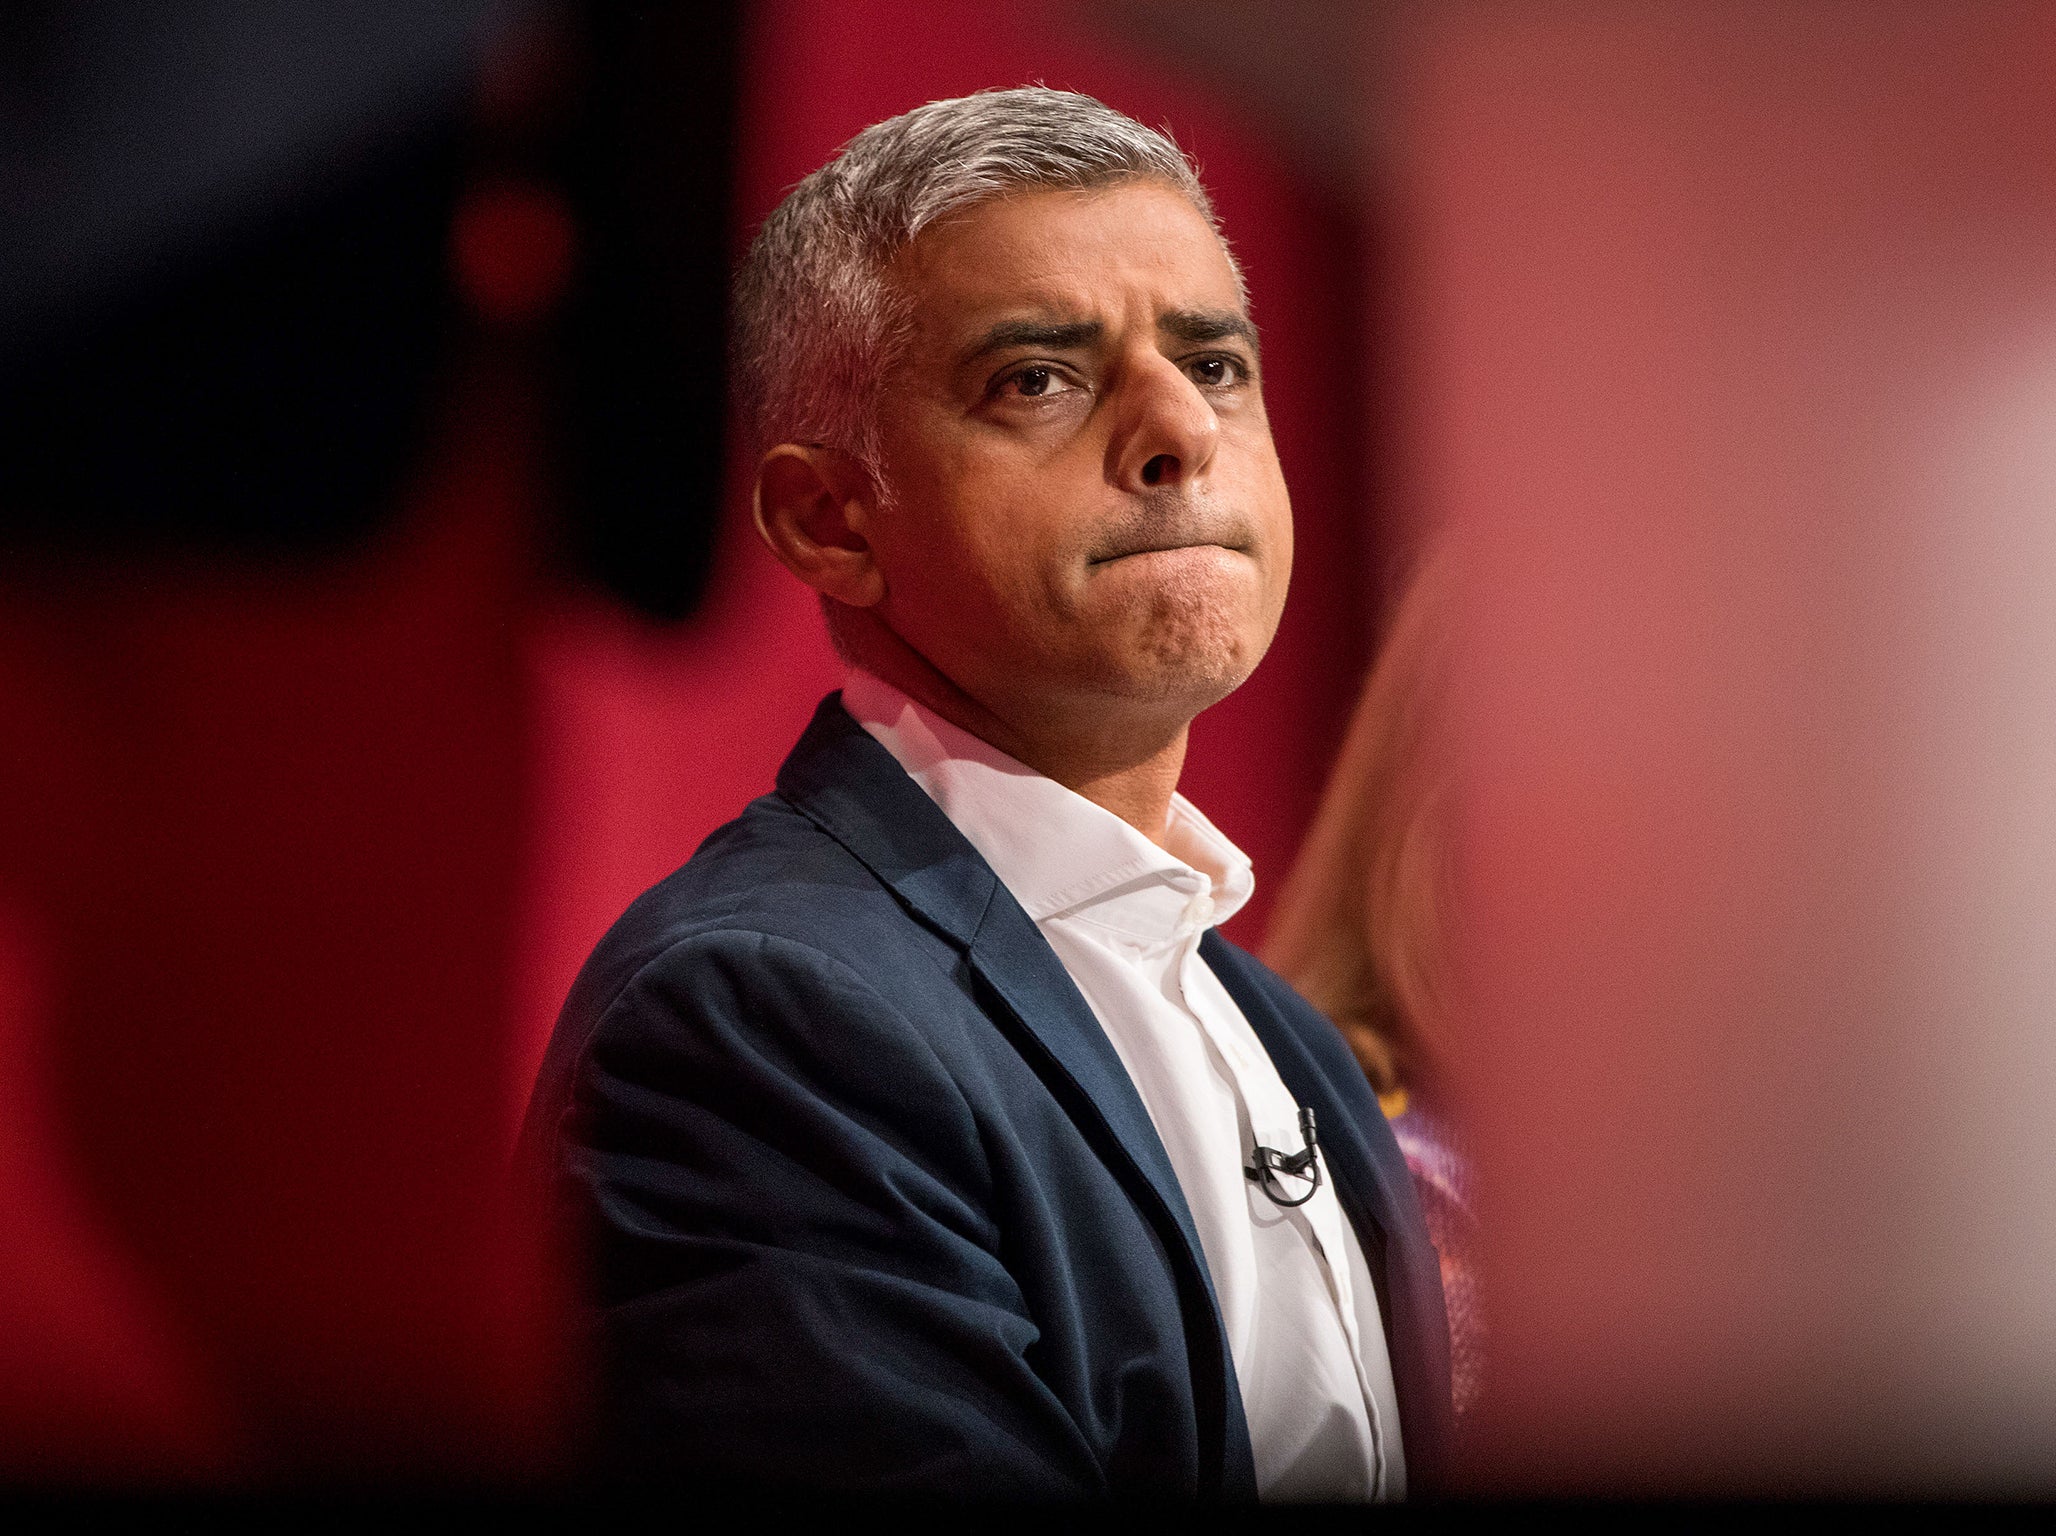 Mr Khan urged Londoners to use their vote in the local elections to send the message that they don’t want a ‘Tory extreme hard Brexit which would plunge London’s care sector deep into crisis’